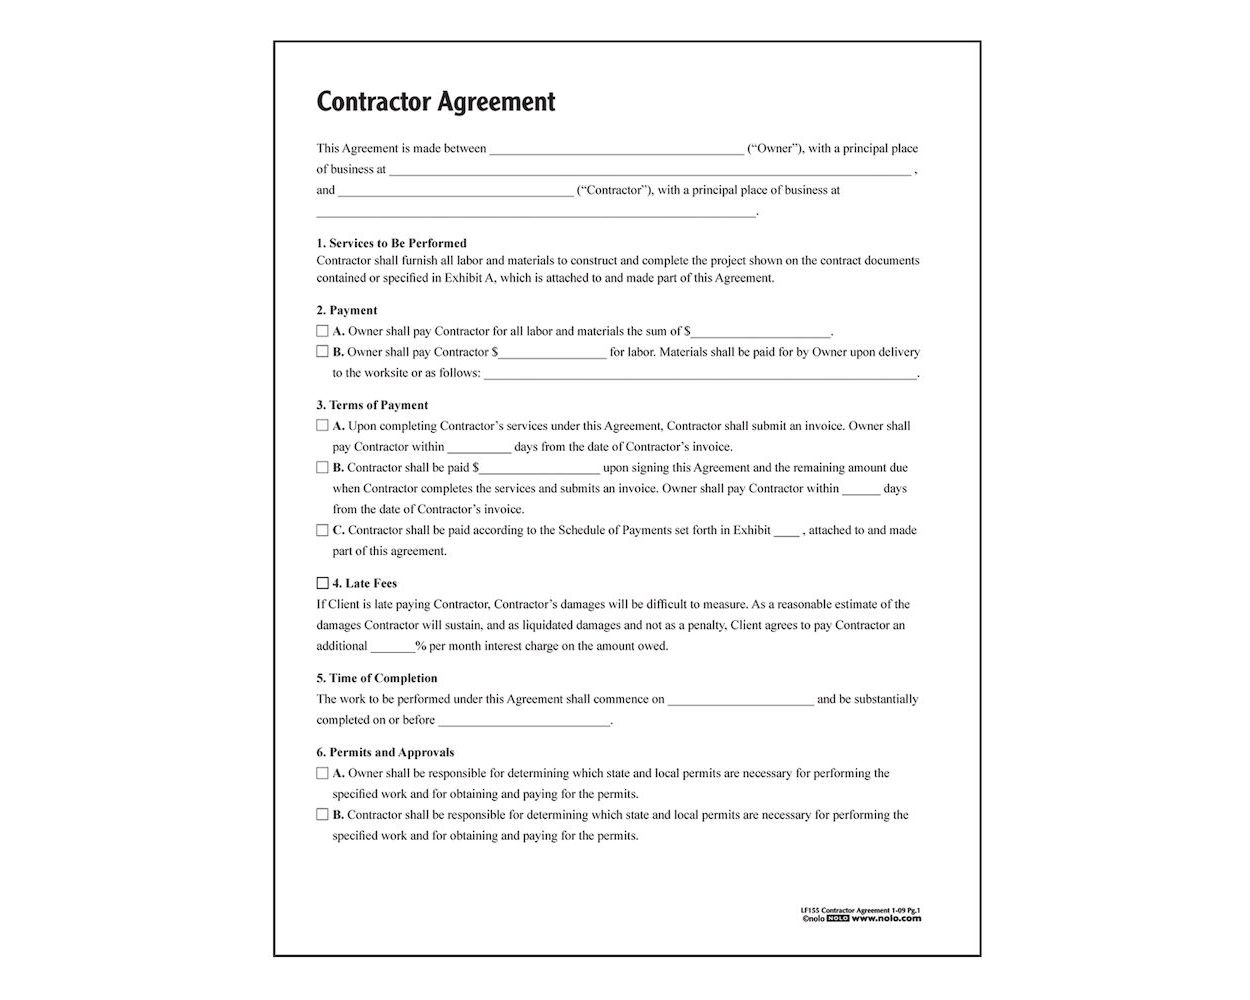 Contractor Agreement, Forms and Instructions Within key holder agreement template